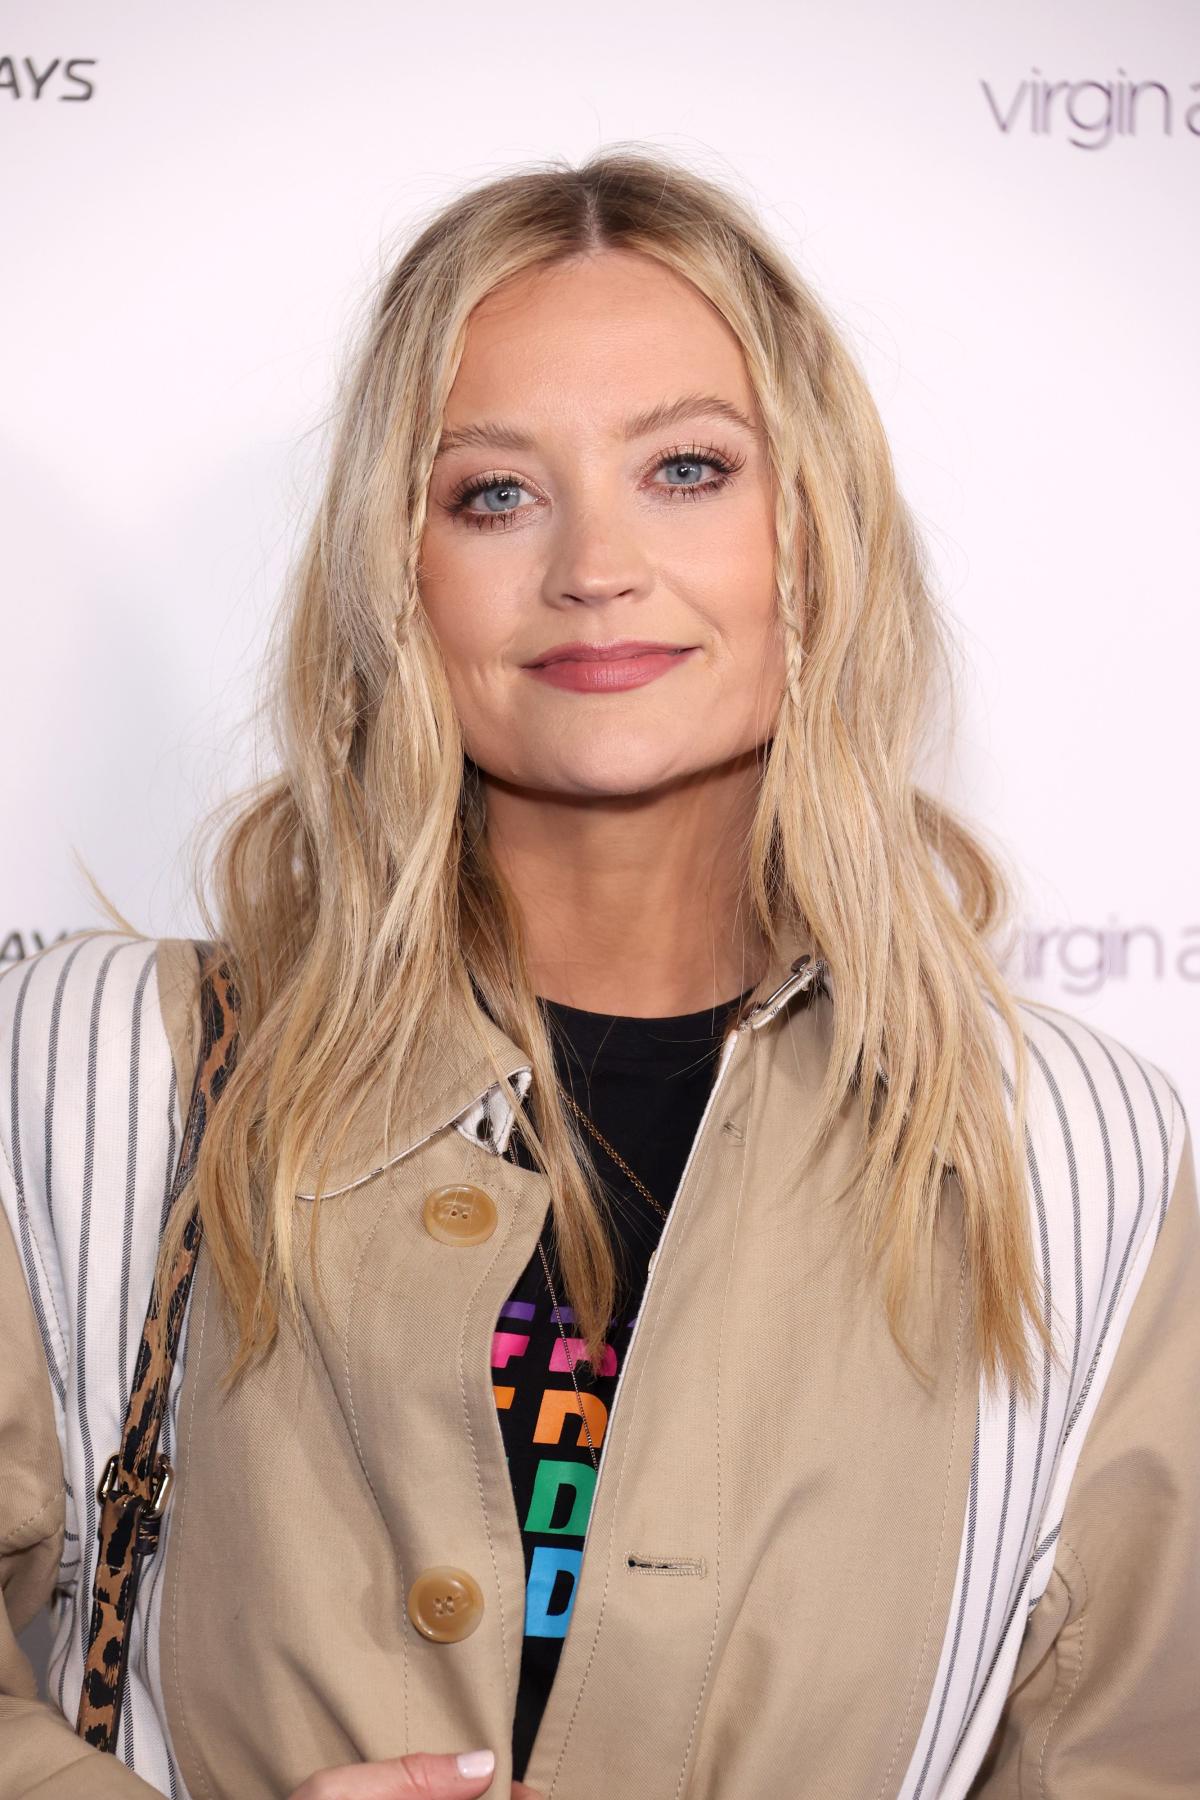 Laura Whitmore shares pic of boobs 'almost exploding' in very